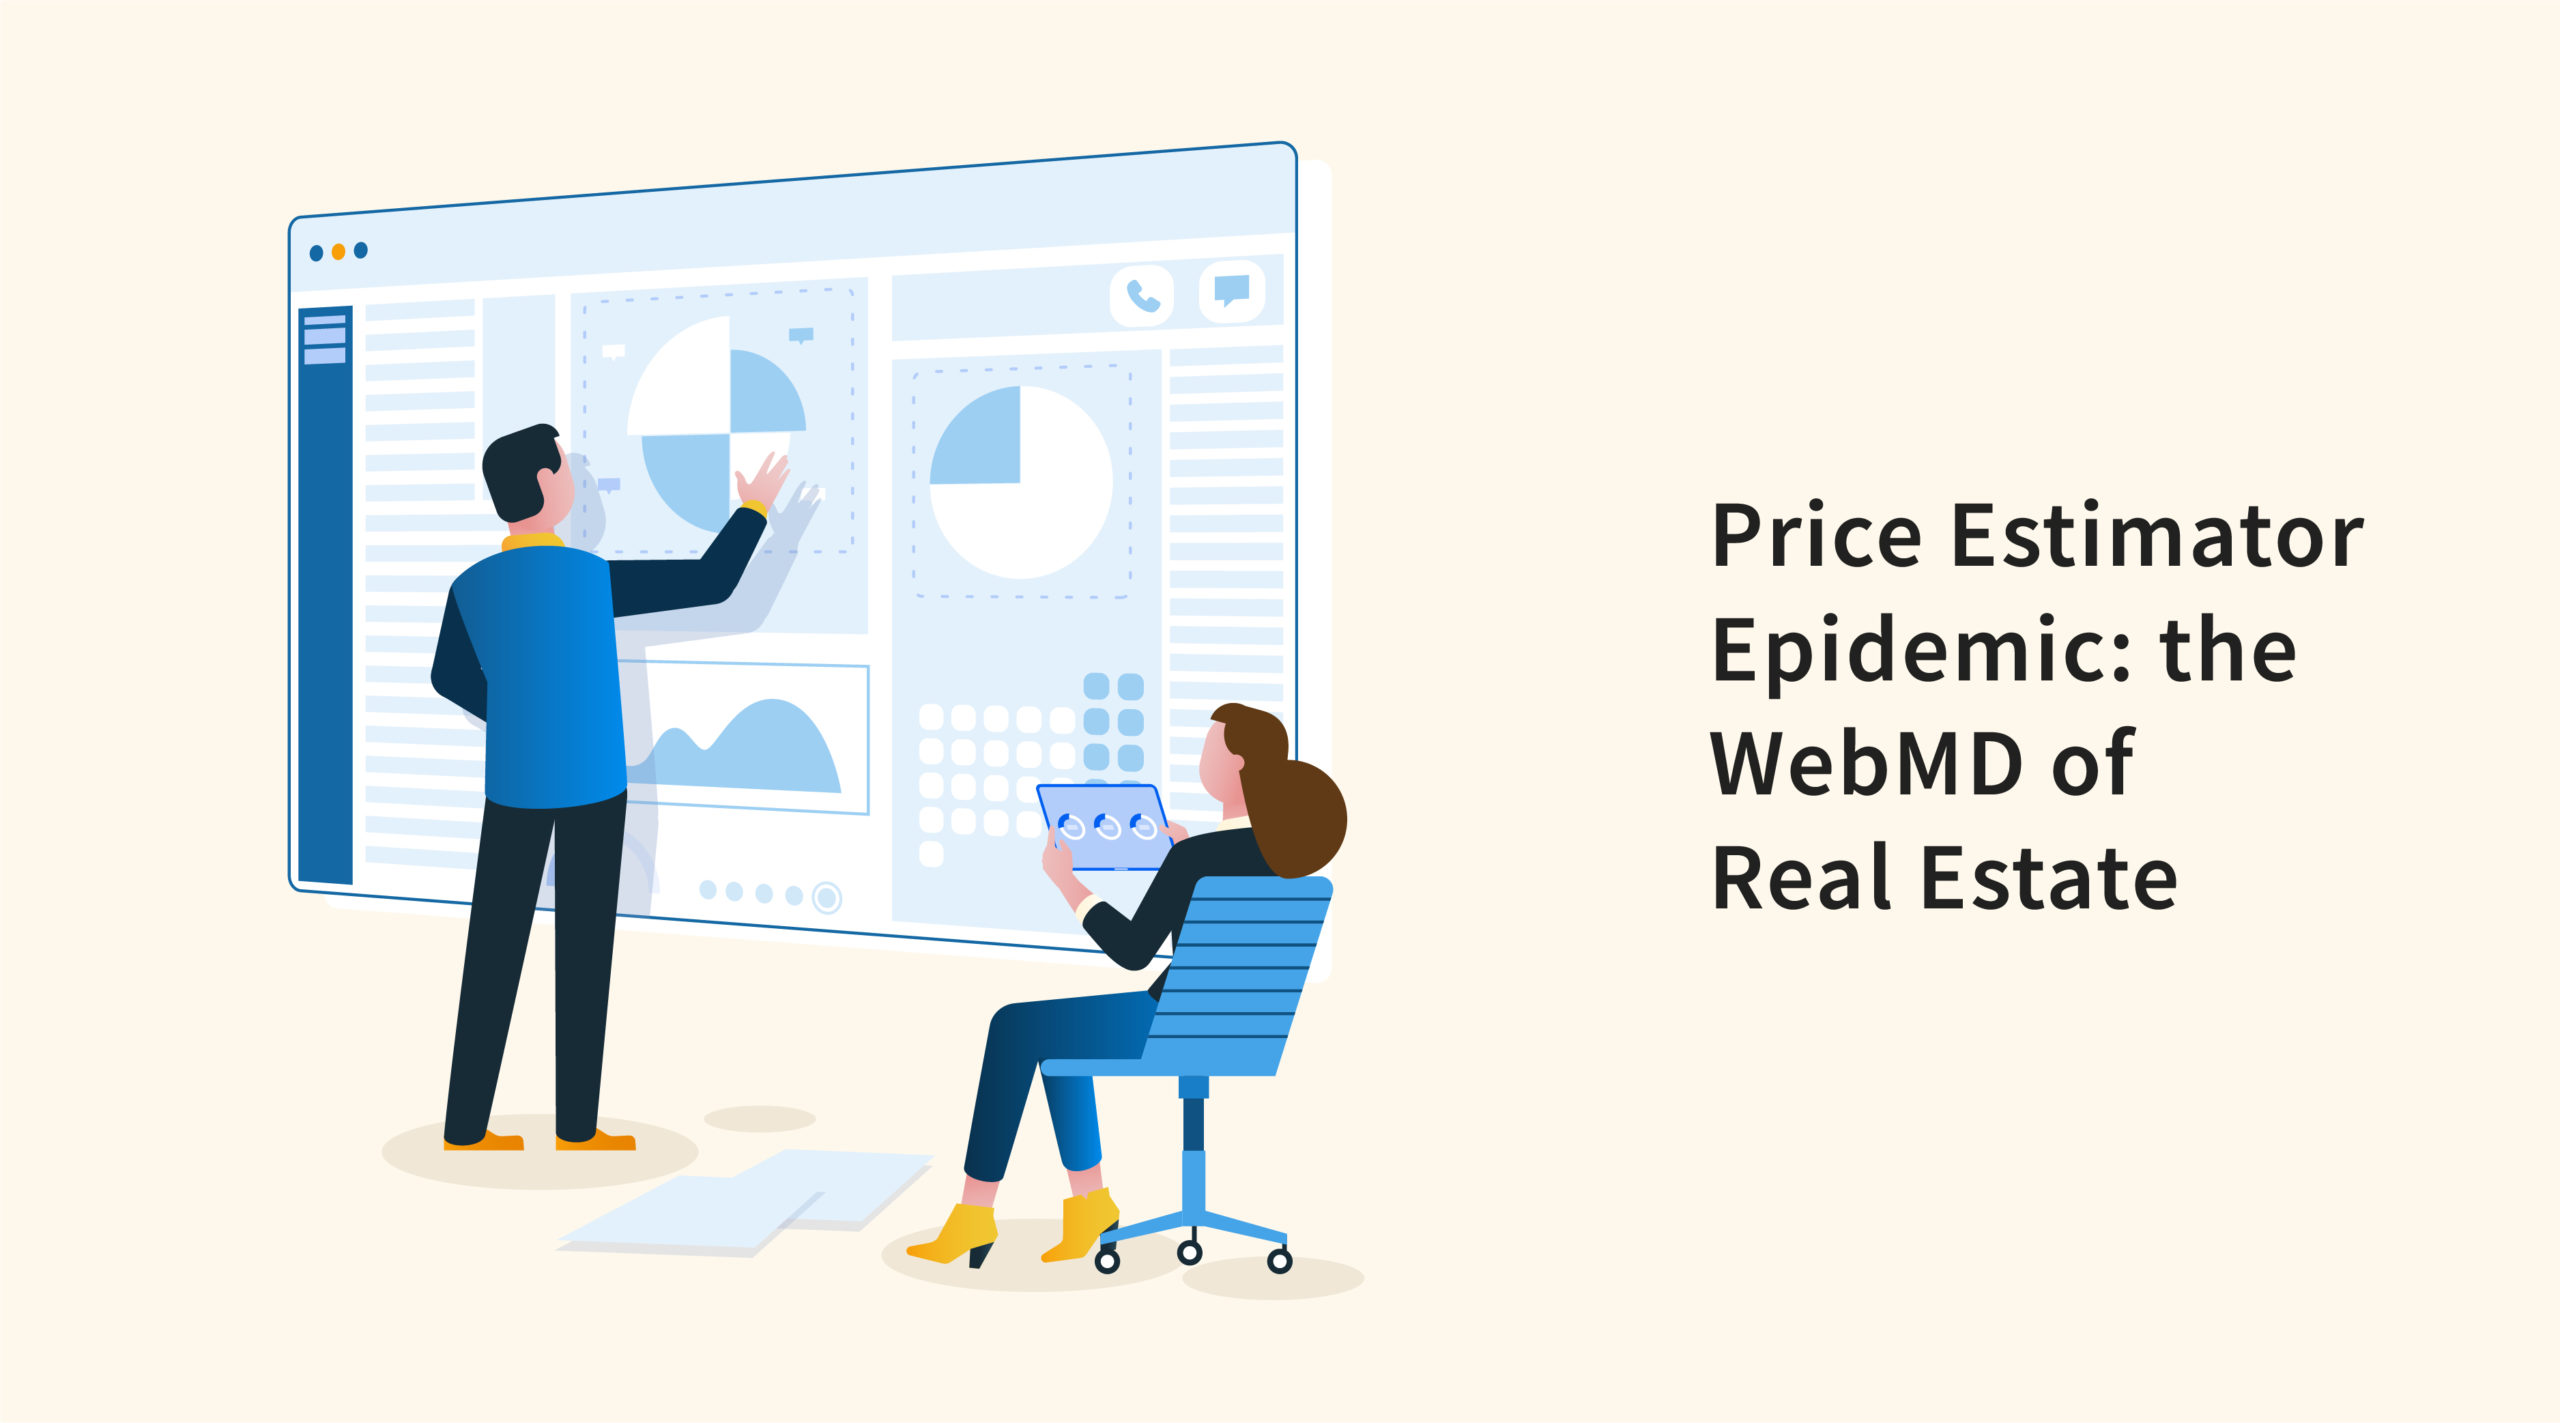 The Price Estimator Epidemic: the WebMD of Real Estate